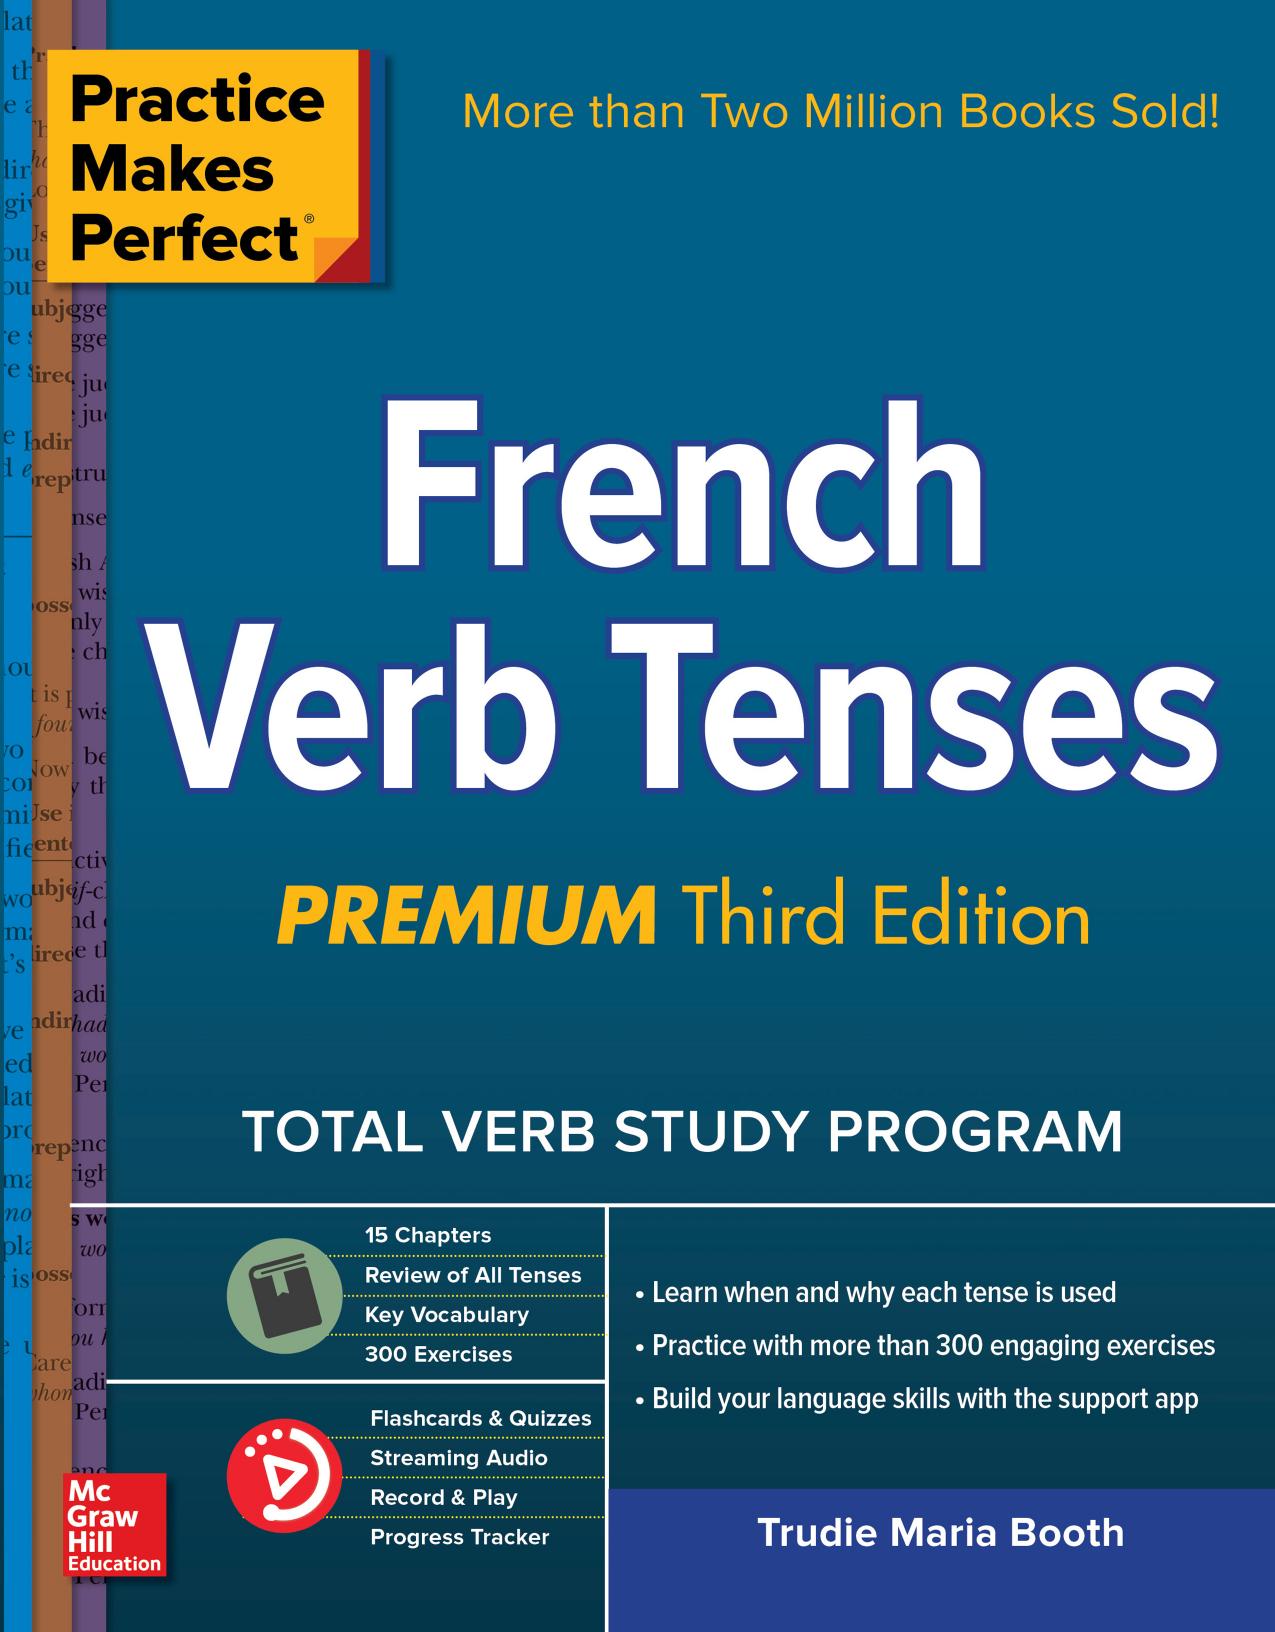 french-grammar-the-perfect-tense-easy-as-1-2-3-presentation-in